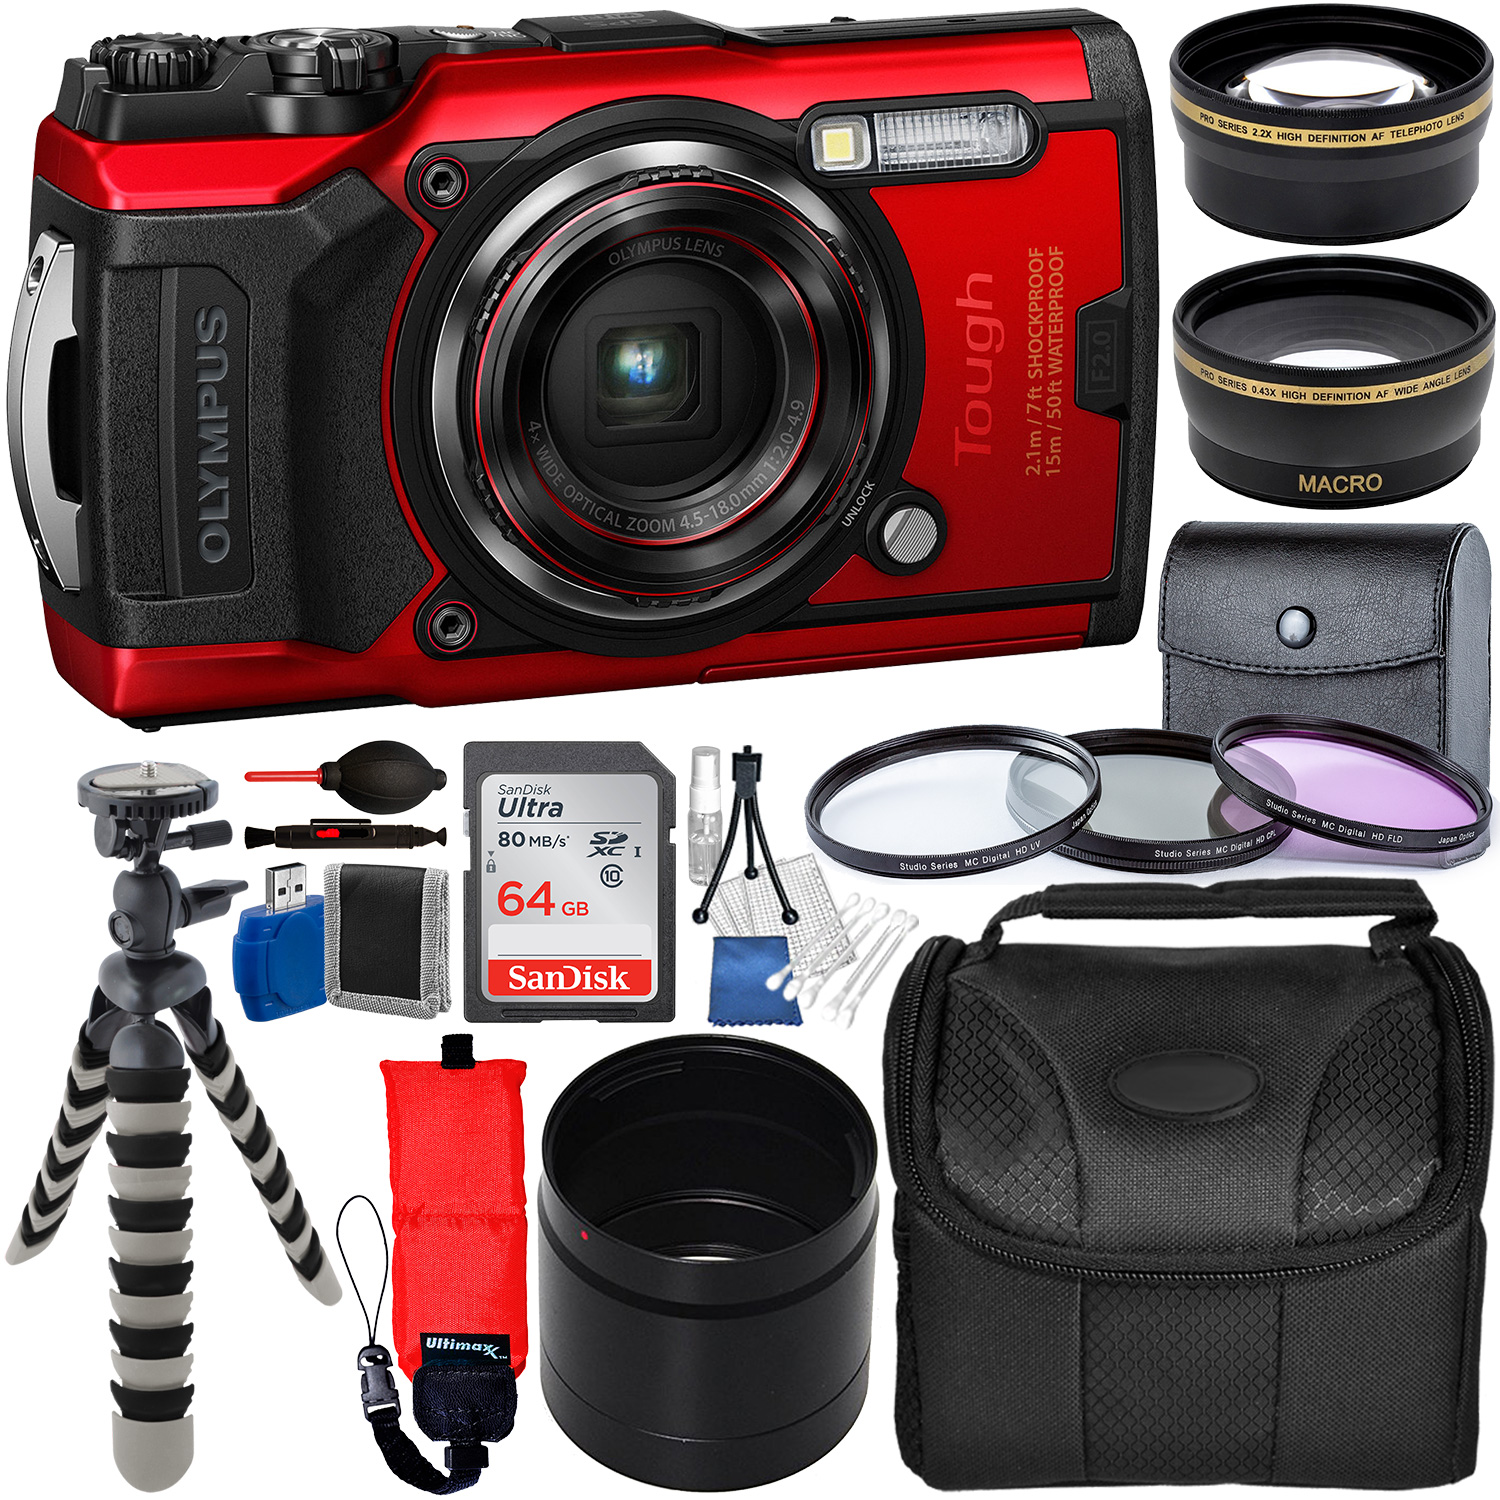 Olympus Tough TG-6 Digital Camera (Red) - V104210RU000 with Deluxe Accessory Bundle